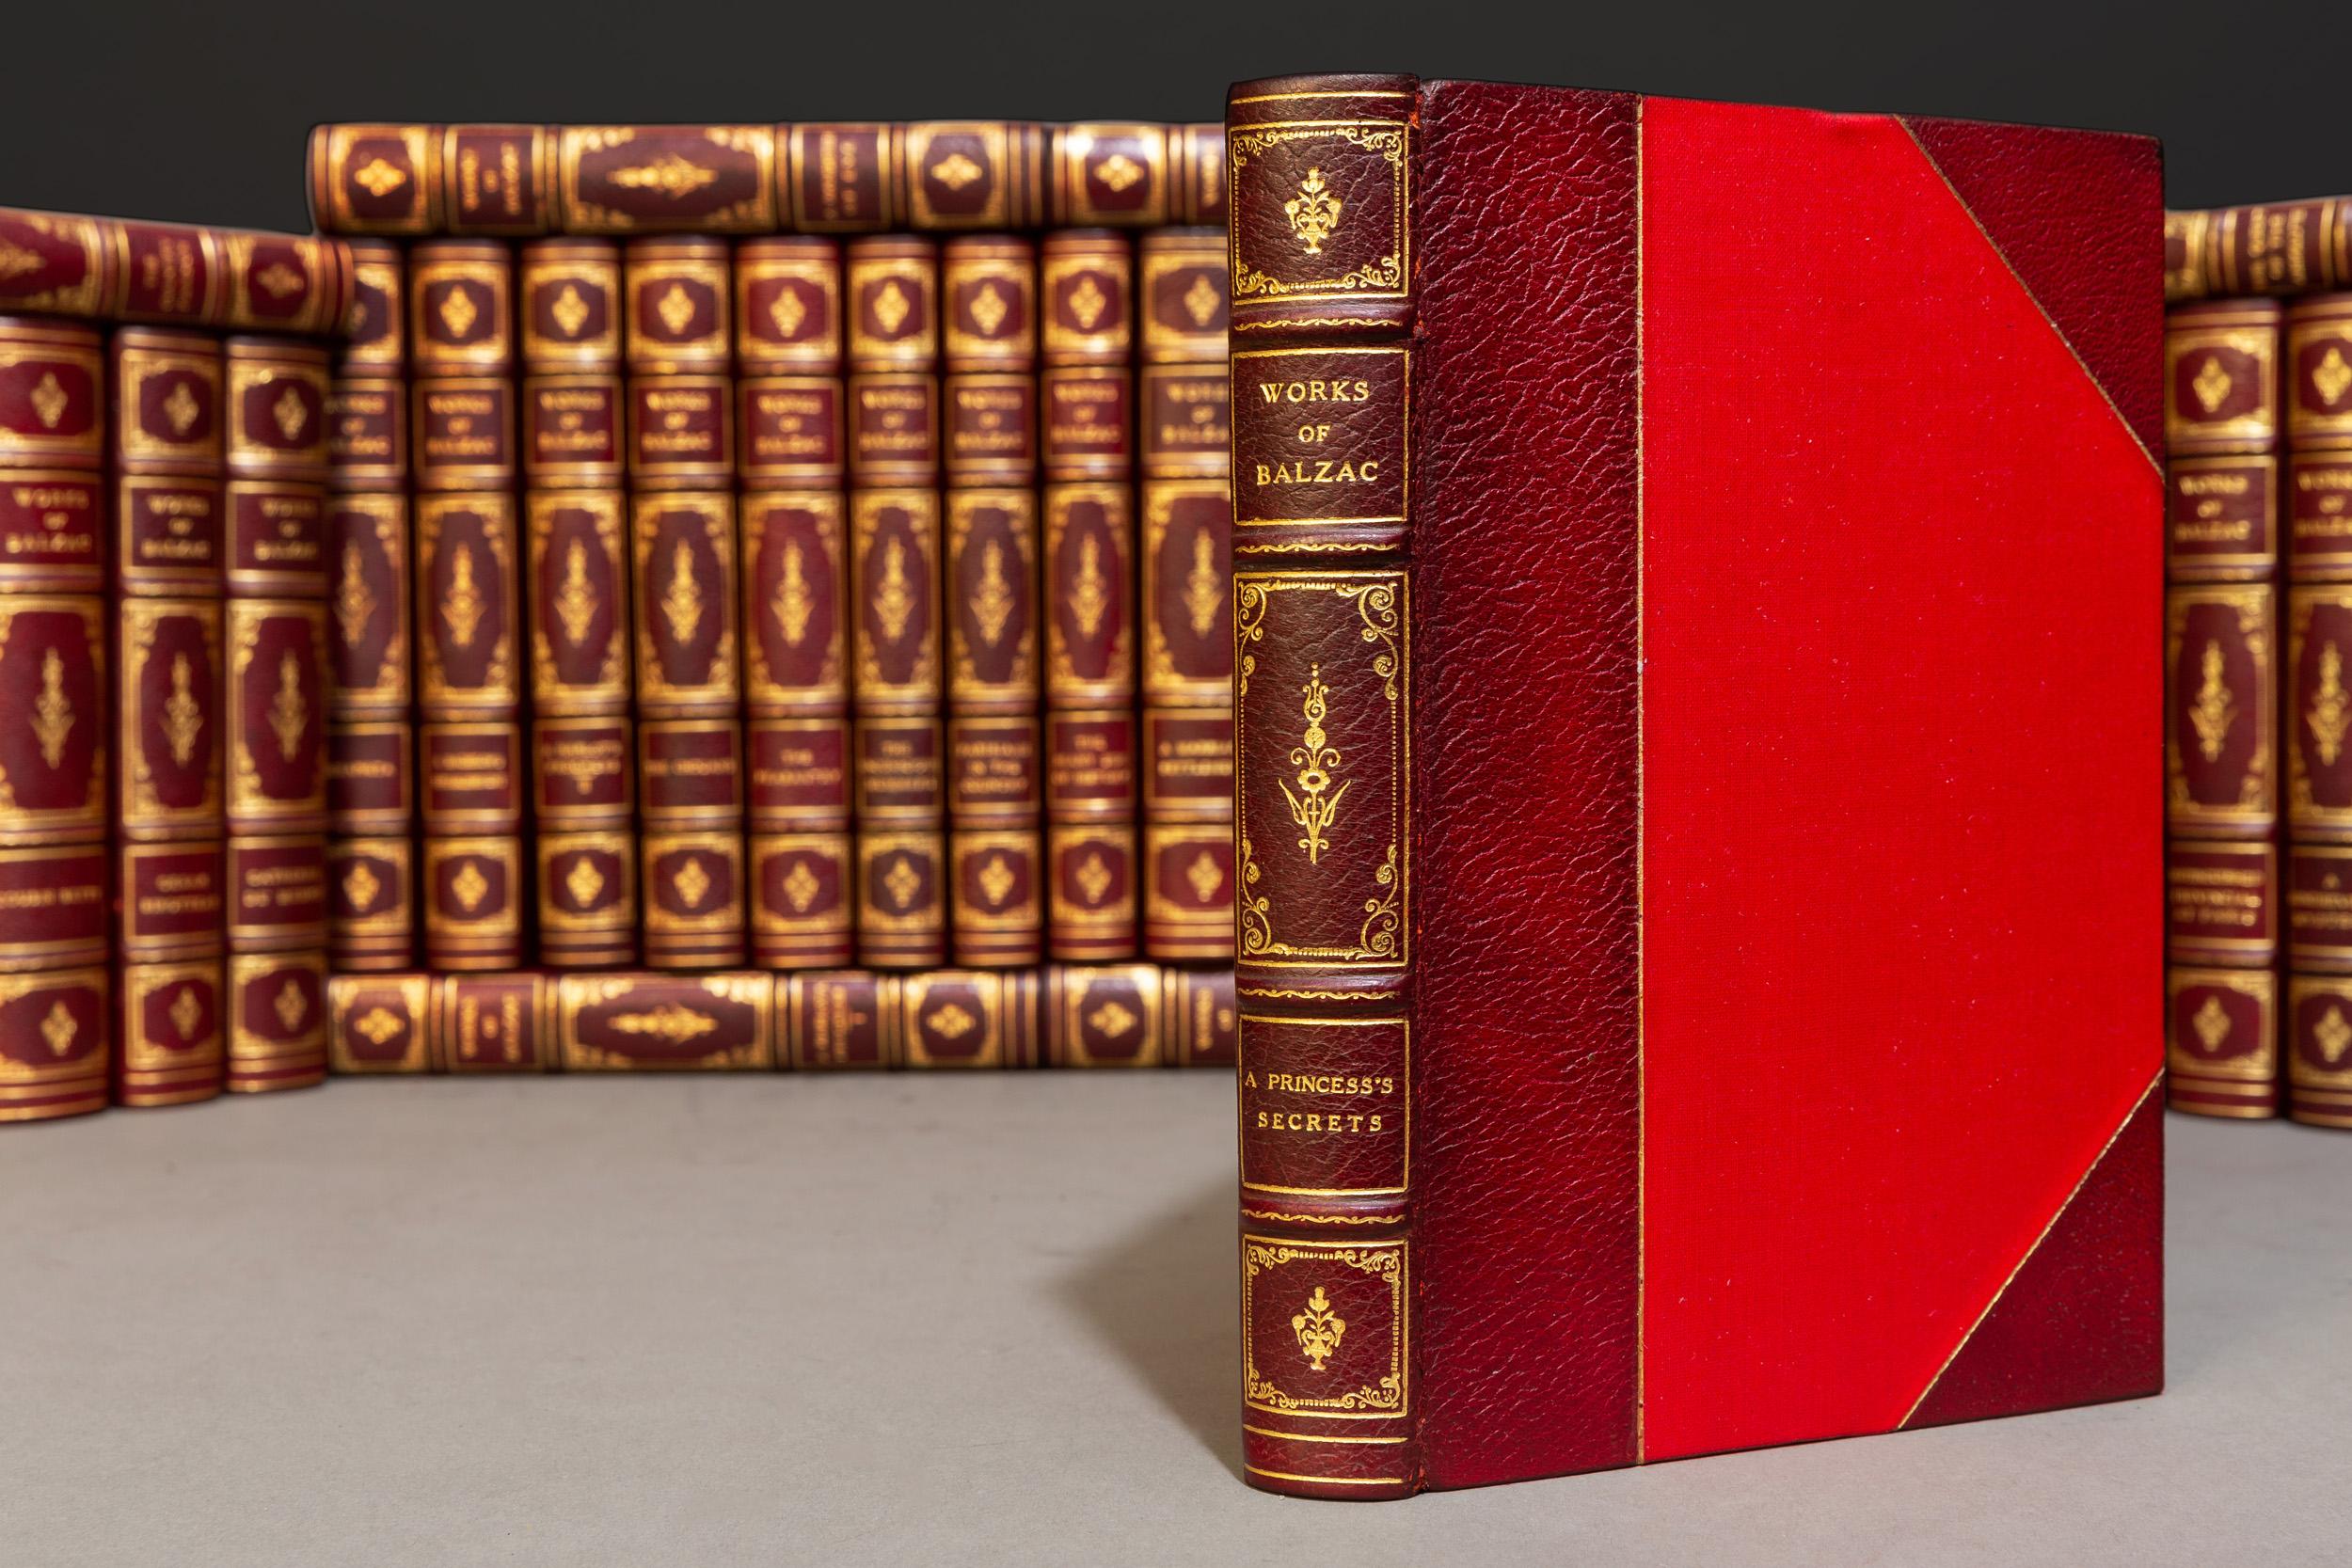 40 Volumes. Honoré de Balzac. The Complete Works. Translated by Clara Bell. With Preface by George Saintsbury. With frontispiece. illustrations and etchings by W. Boucher. Bound in 3/4 crimson morocco by Stikeman & Co. Linen boards. Gilt on spines &